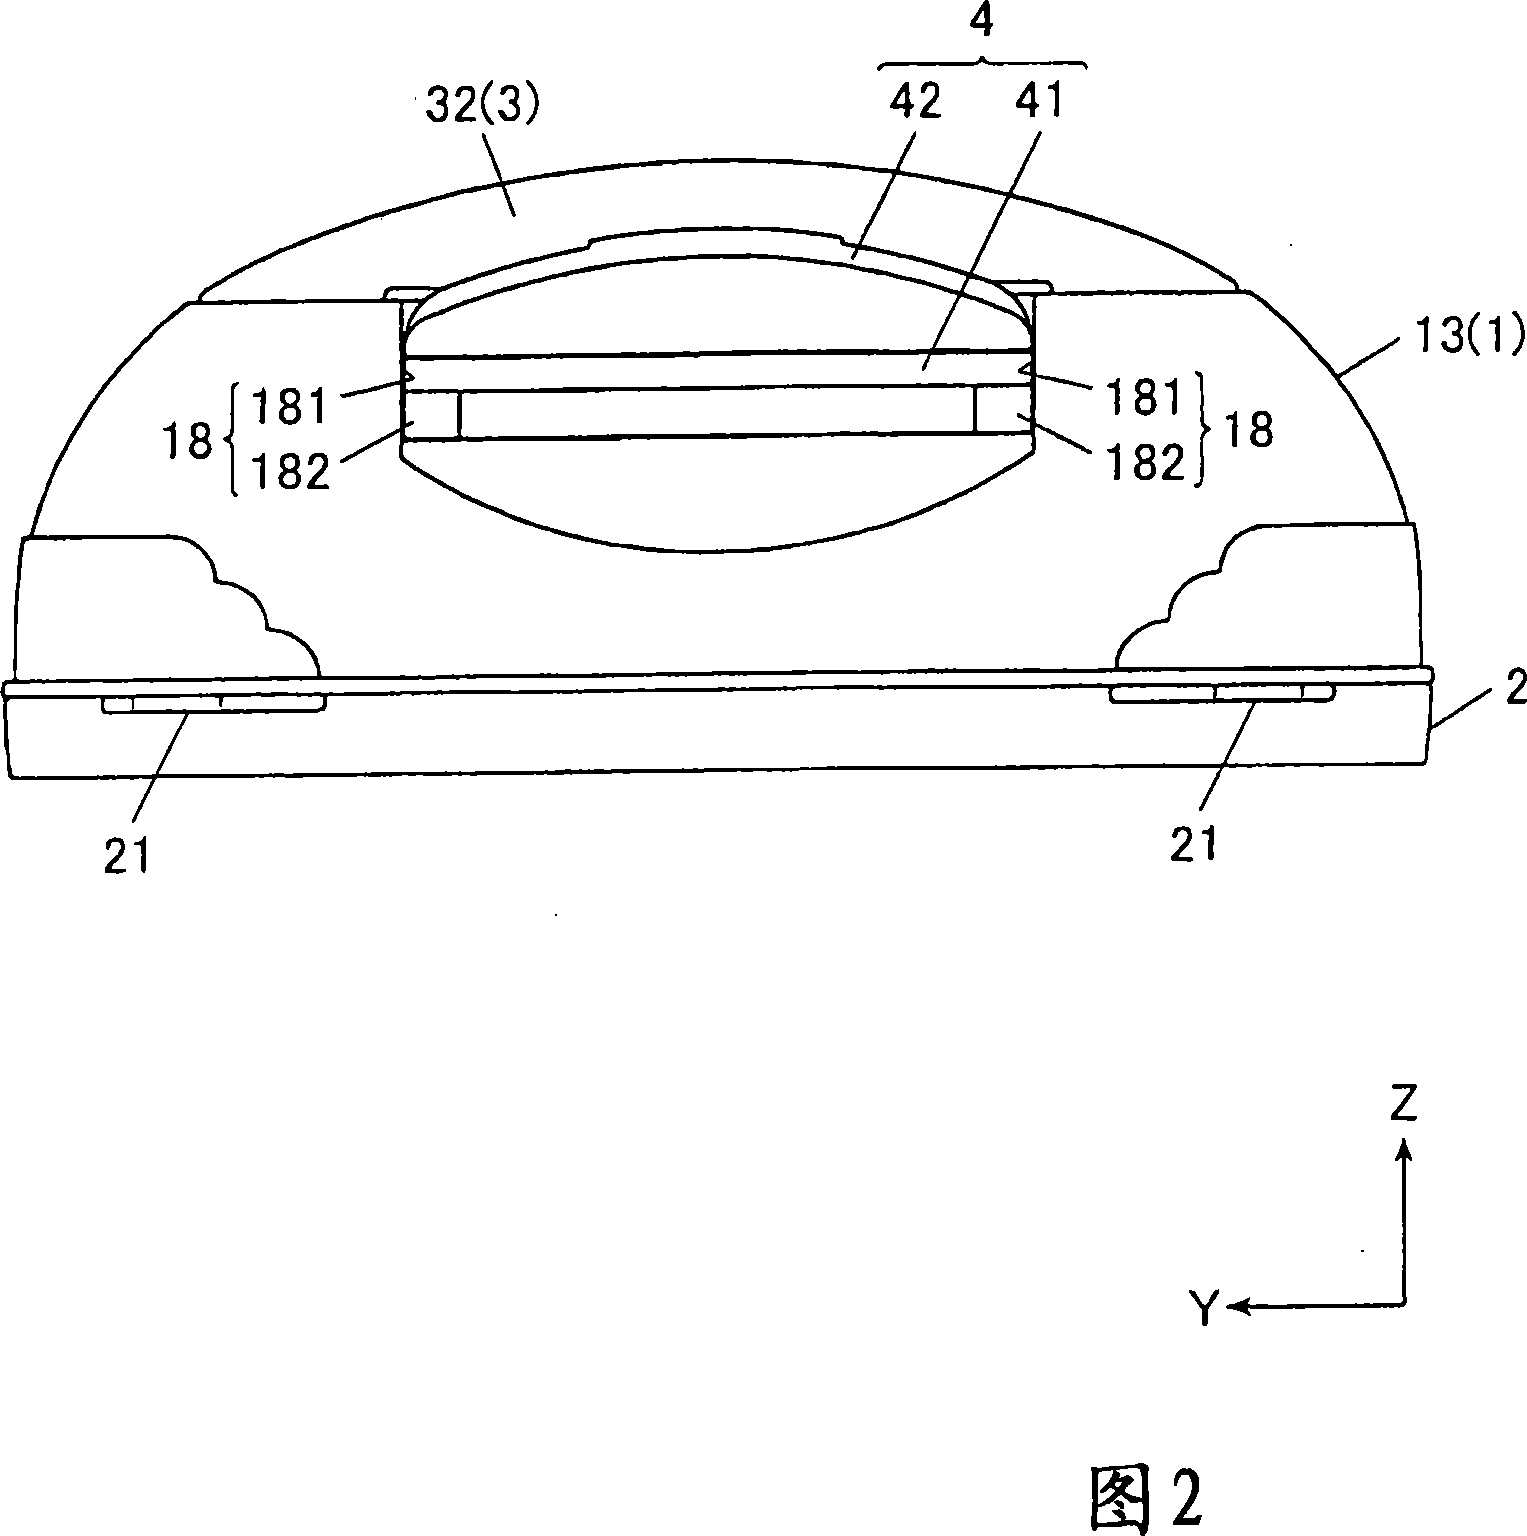 Moisture paper tissue holding container and bag binding mechanism for moisture paper tissue holding container